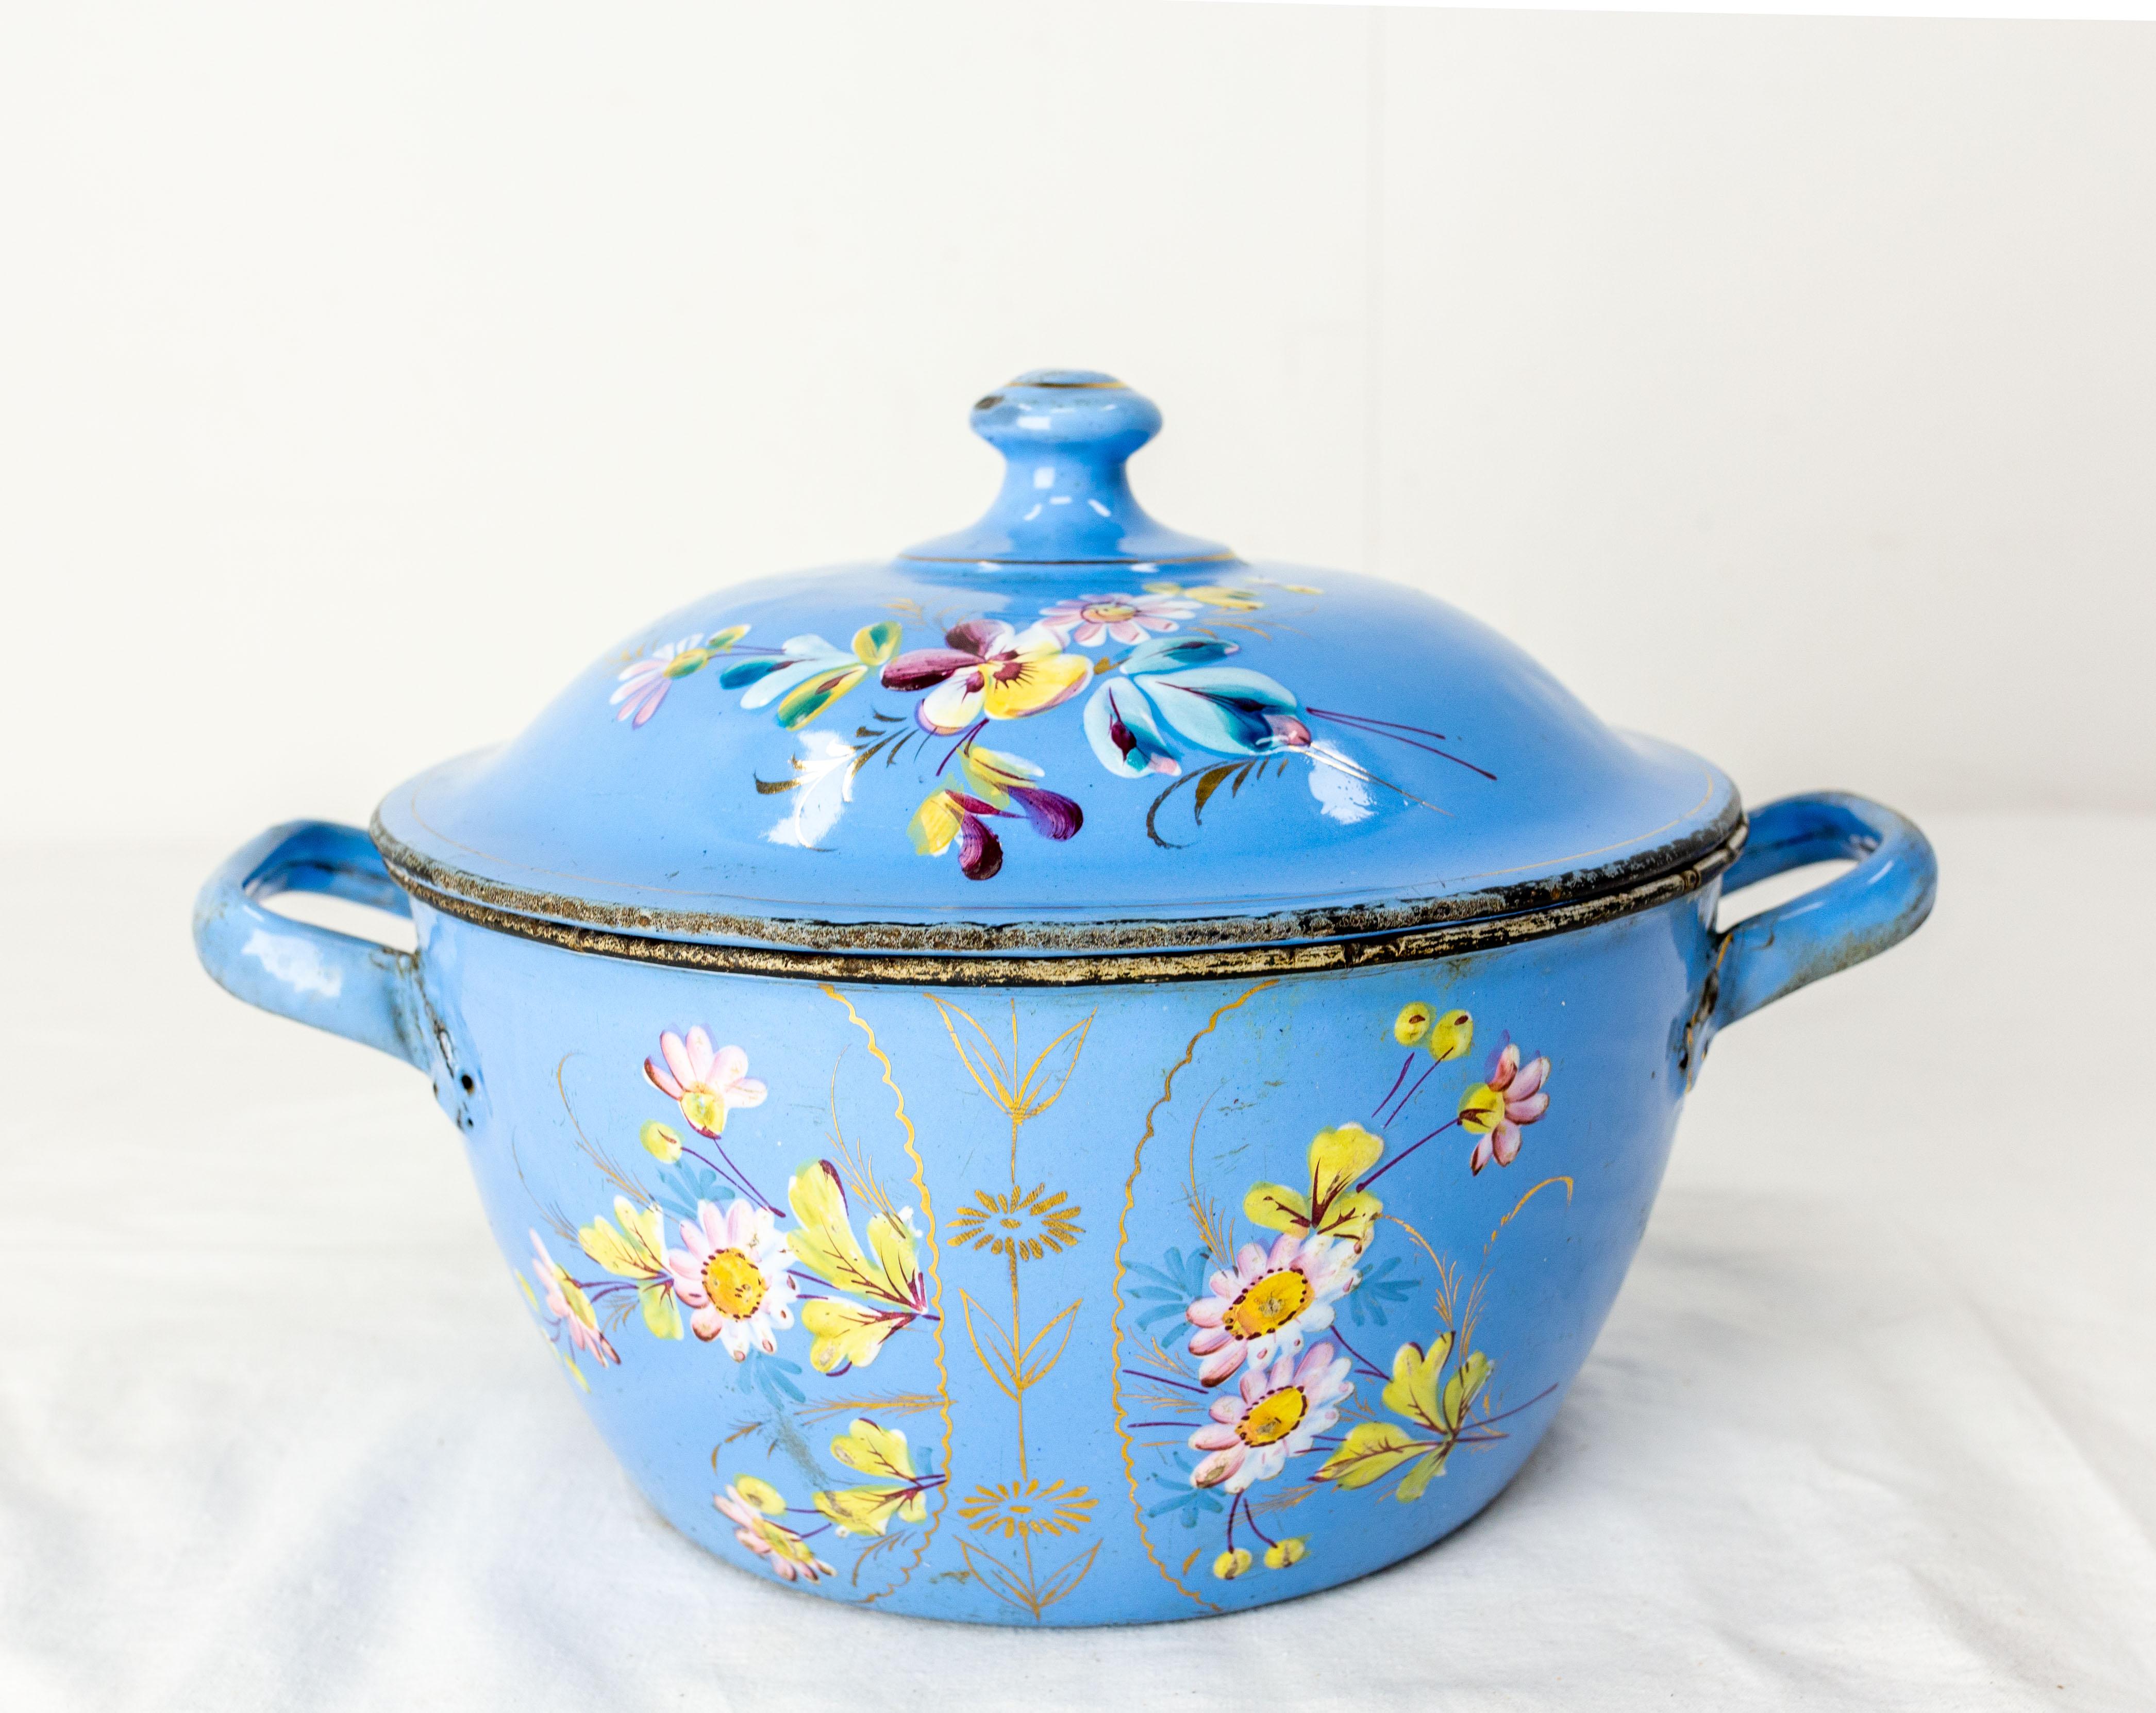 French soupière or soup bowl.
Blue and white iron soup tureen with floral decoration on the top and on the bowl
circa 1900
Good condition.

Shipping:
L23 P23 H13,5 1Kg.